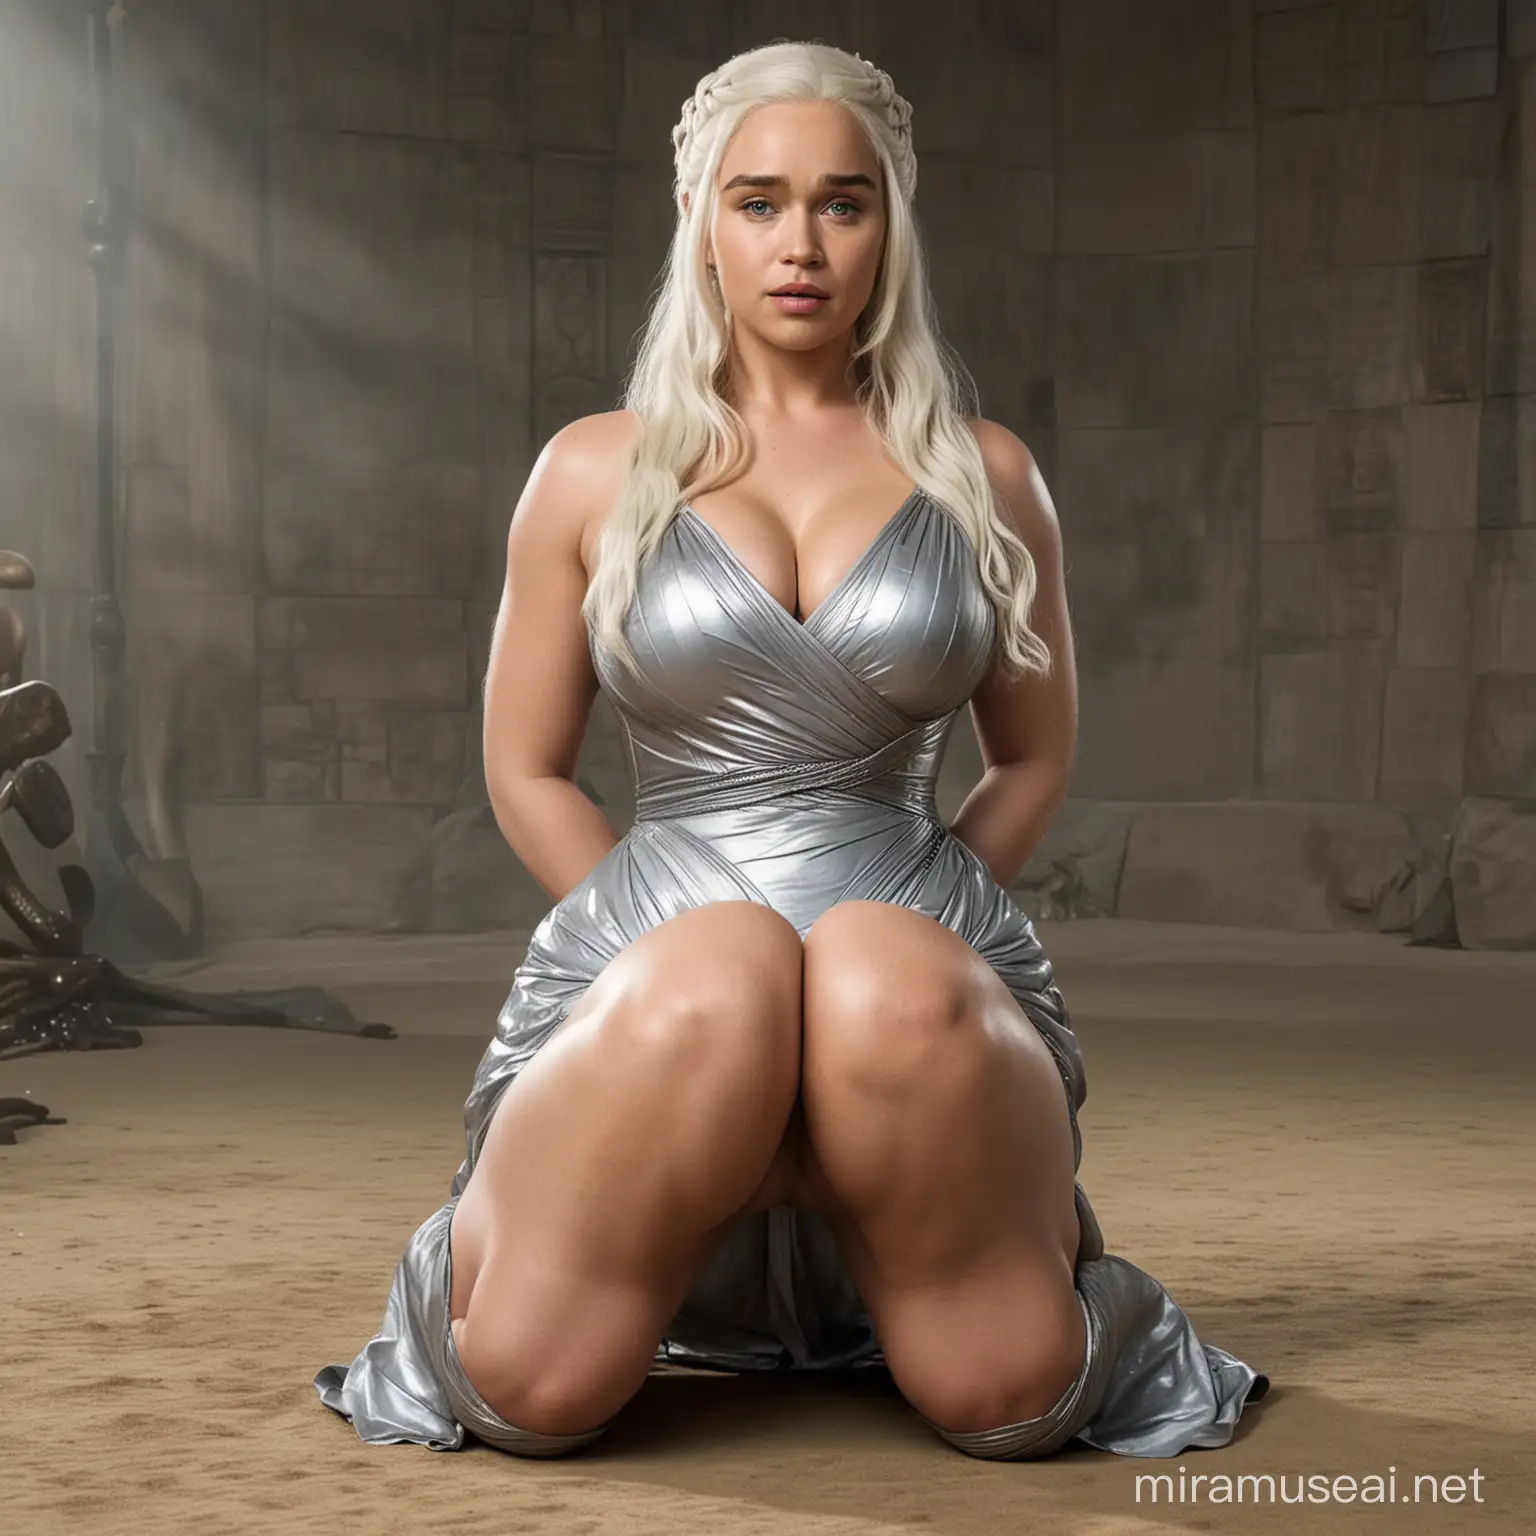 daenerys targaryen, tight silver dress, squatting, bbw, insanely giant ass, pawg, curvy accentuated booty, thicc, insanely inflated hips, from game of thrones, fully clothed